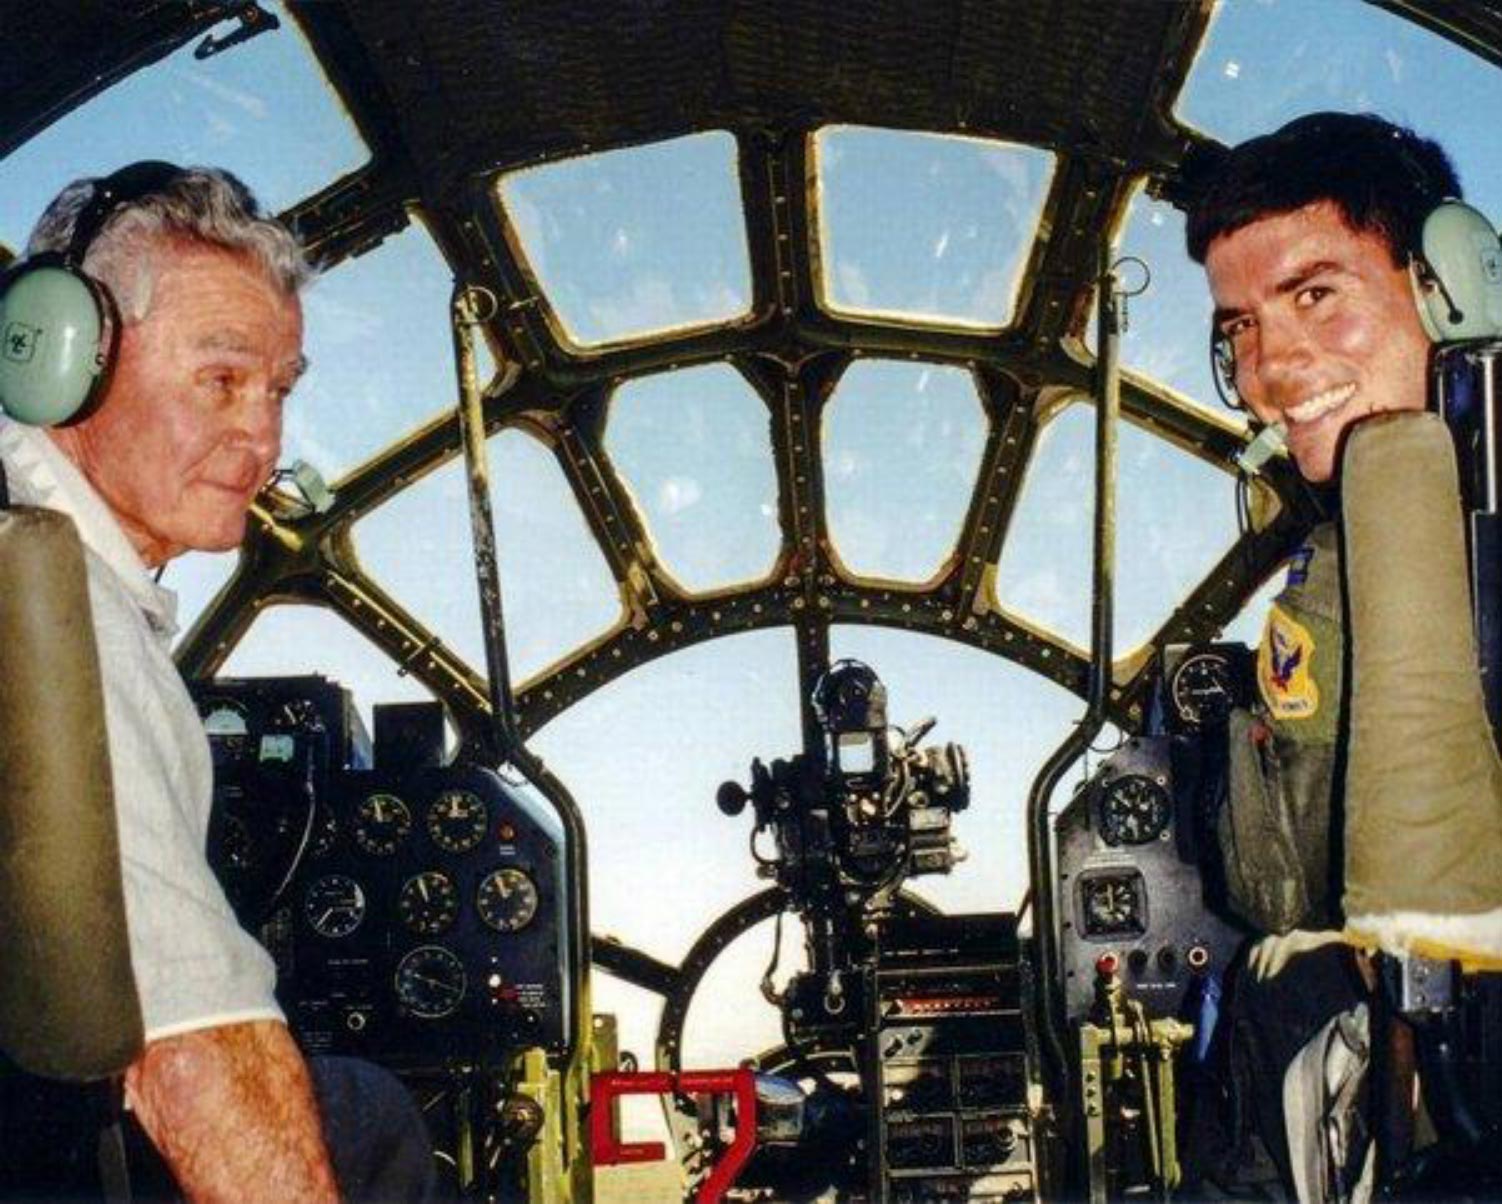 Anecdotes of WWII - General Tibbets and grandson Paul Tibbets in the cockpit